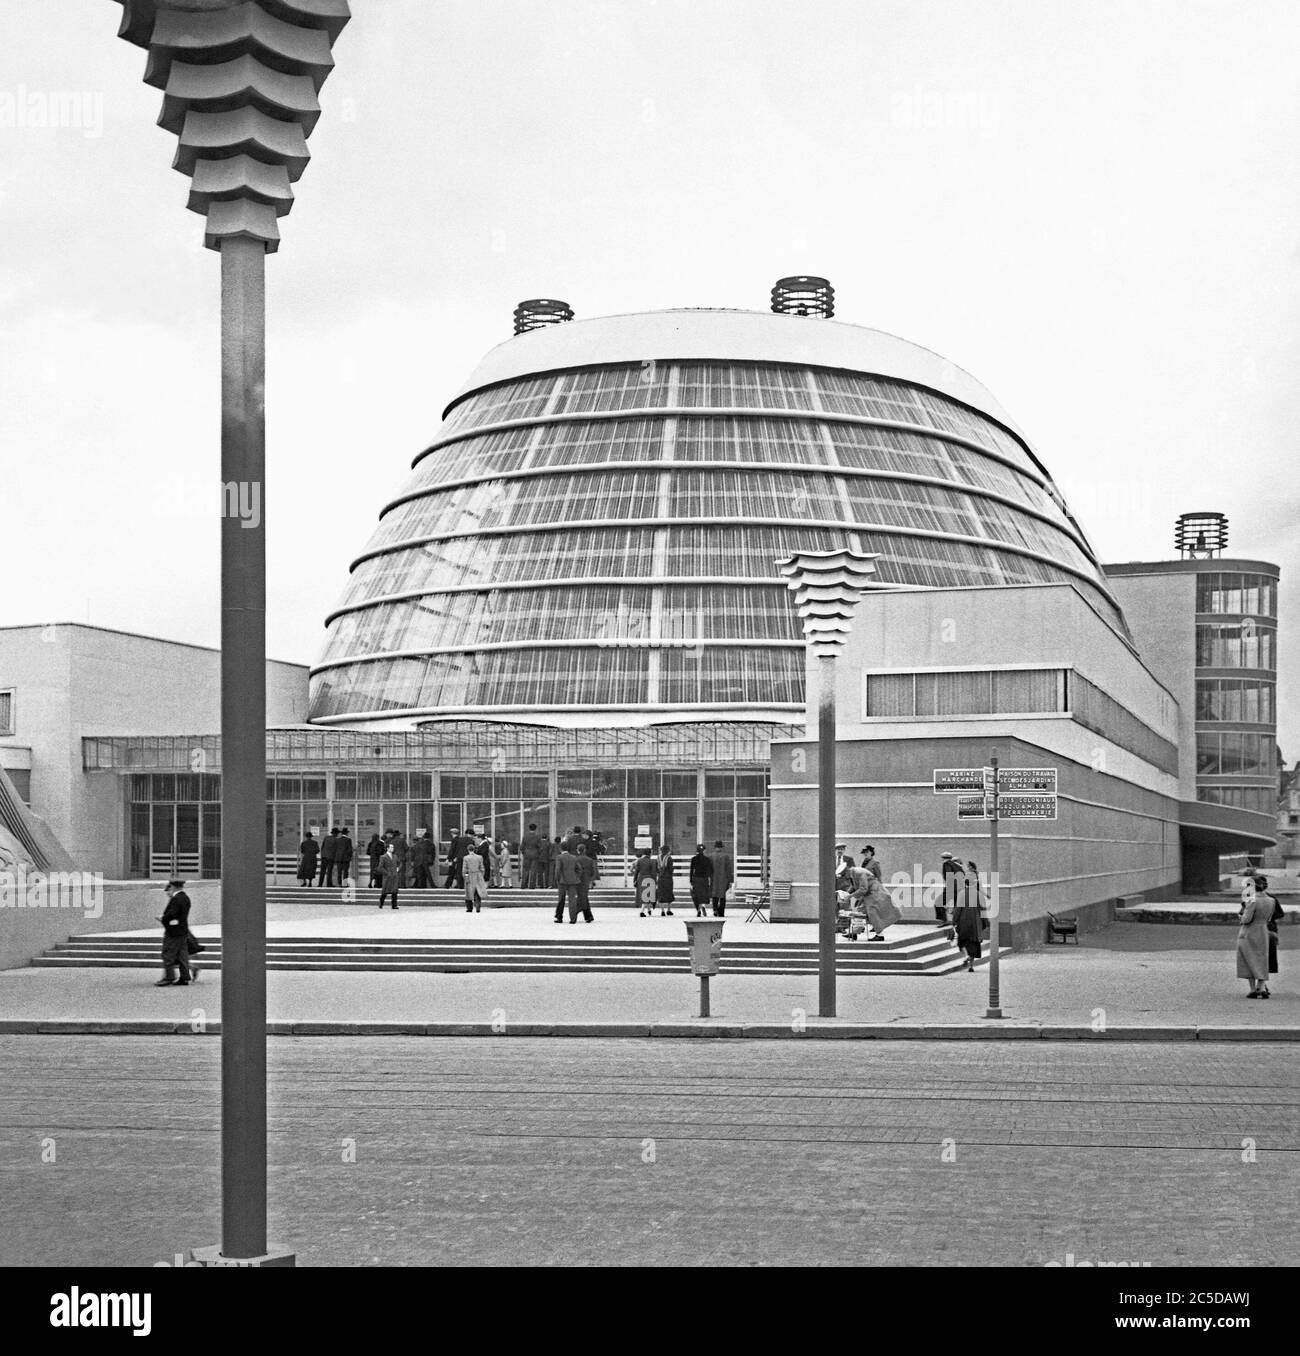 A view of the 1937 Expo (World's Fair or Exposition) held in Paris, France – here people in front of the Palais de l'Air (Palace of the Air), a striking modern building in the 'Sections Transports' part of the site. This pavilion was a large series of galleries designed by Audoul, Hartwig and Gérodias. Housing aviation displays, the centerpiece of the Air pavilion was the vast curved steel and glass gallery that echoed an aircraft hanger. Inside were giant aluminum rings, reminiscent of the rings of Saturn, encircled a plane in a display designed by Robert and Sonia Delaunay. Stock Photo